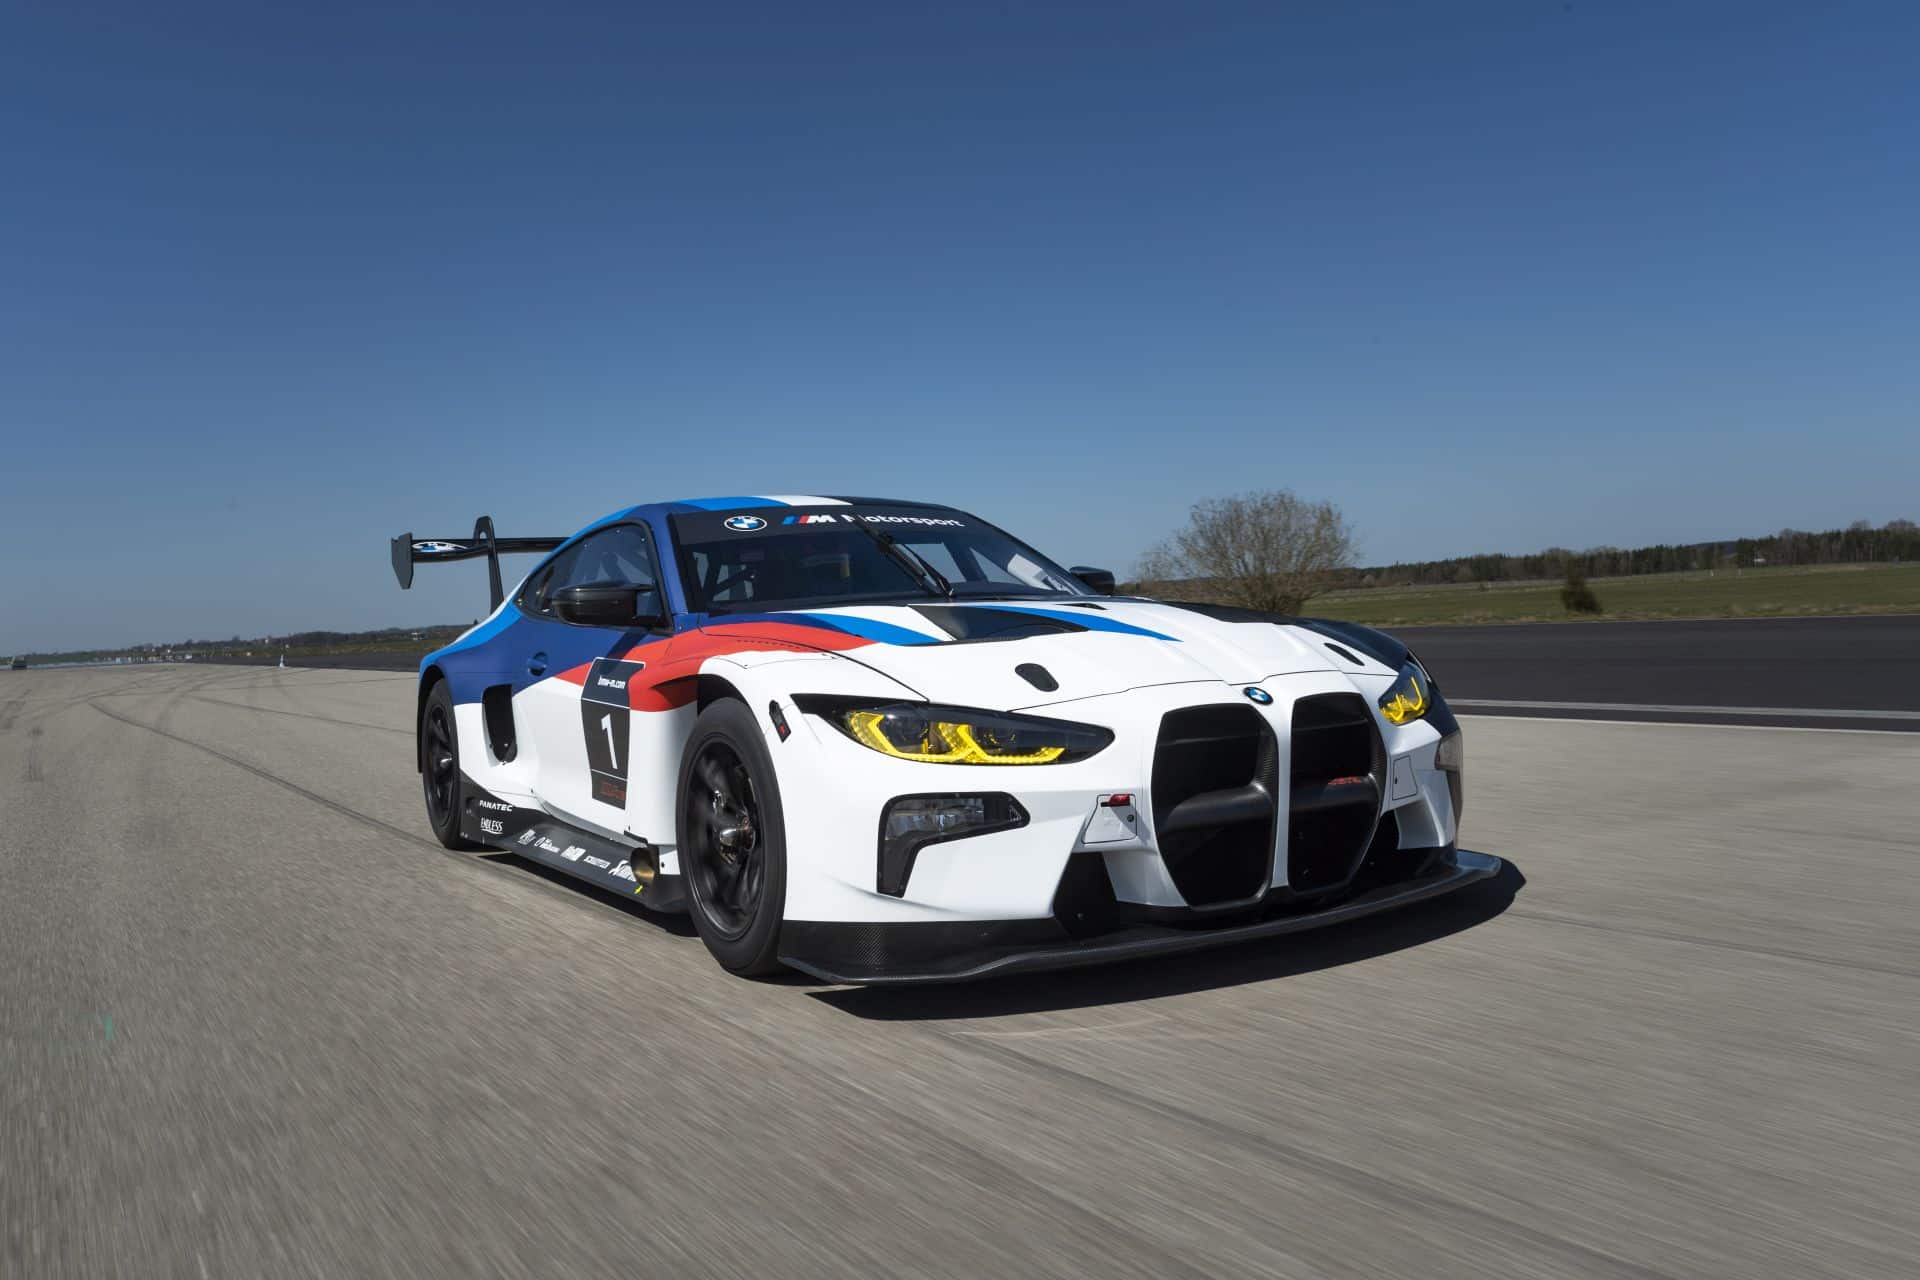 BMW Finally Unveils The New M4 GT3 To The World!